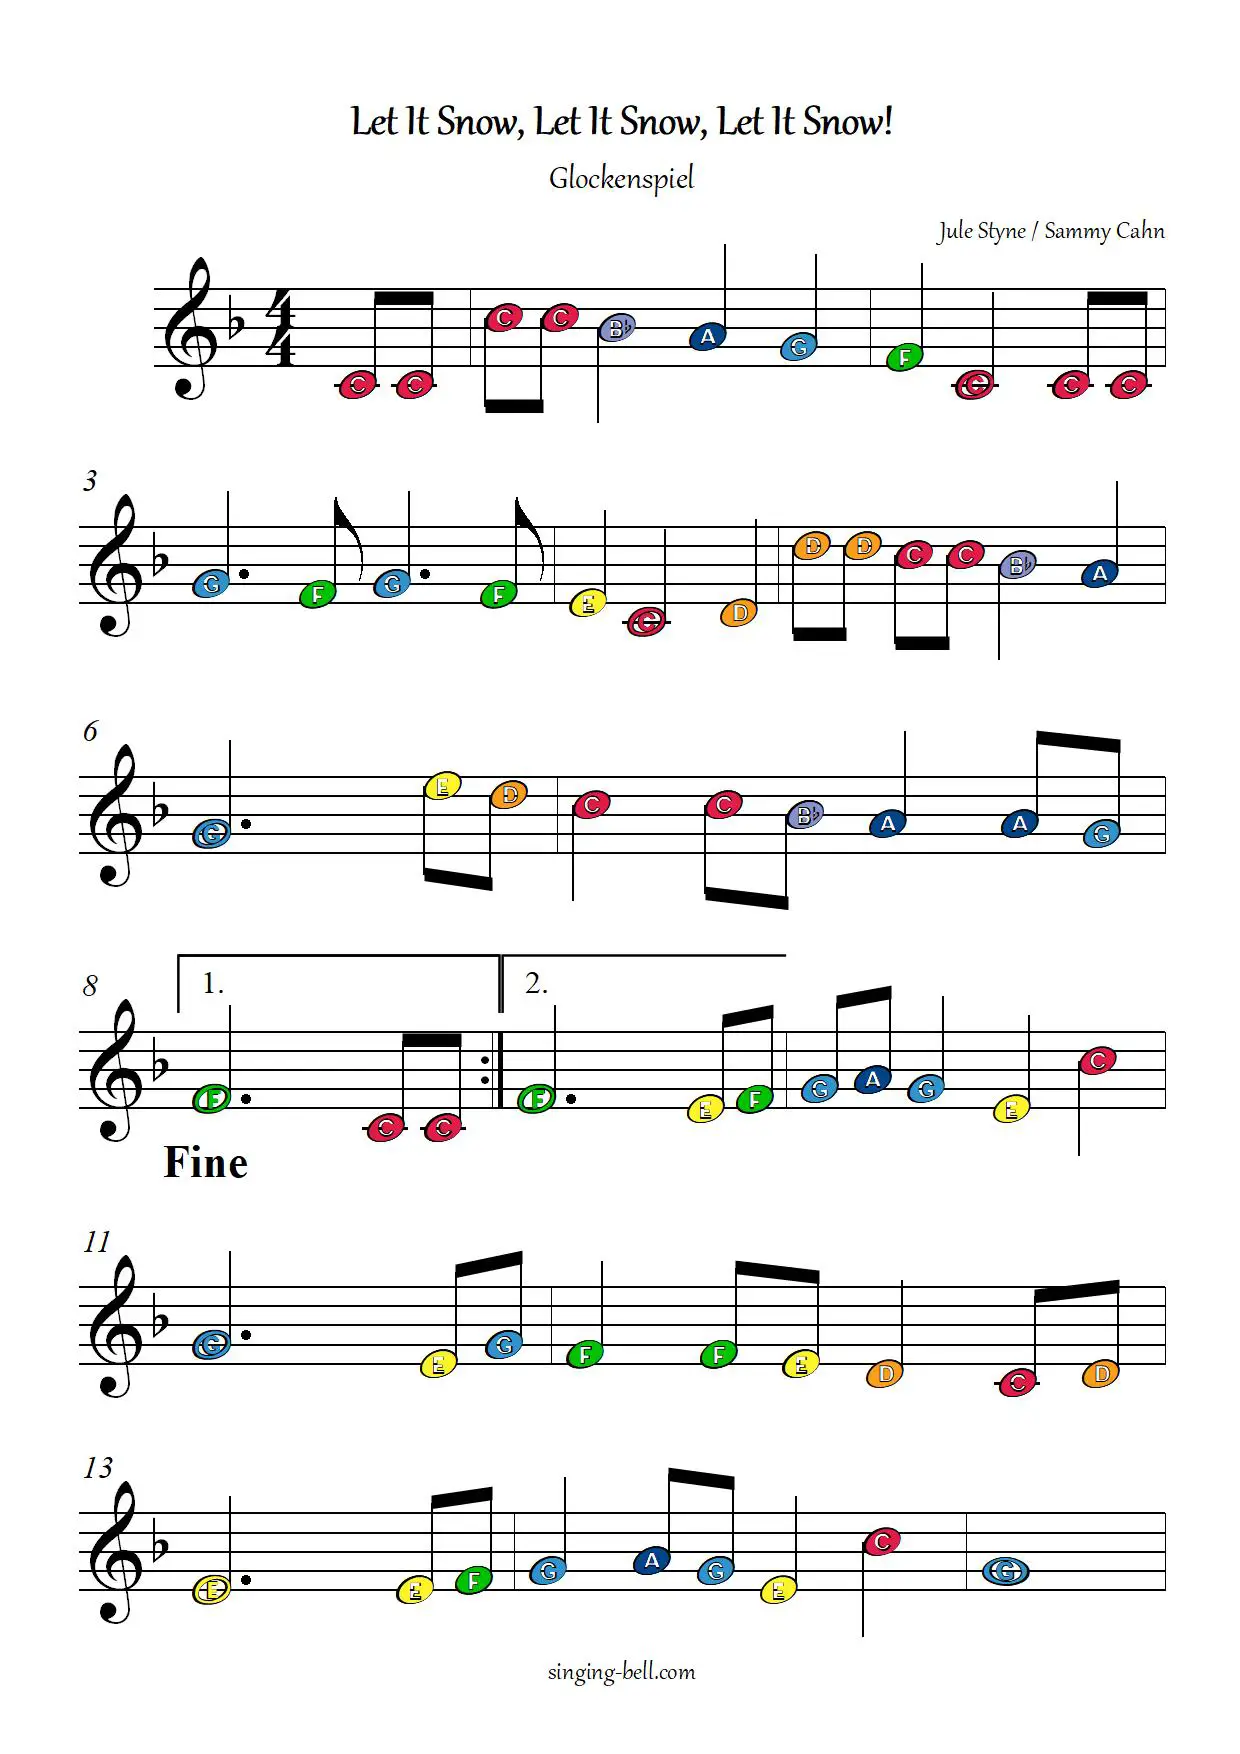 Let it snow free xylophone glockenspiel sheet music color notes chart pdf p.1